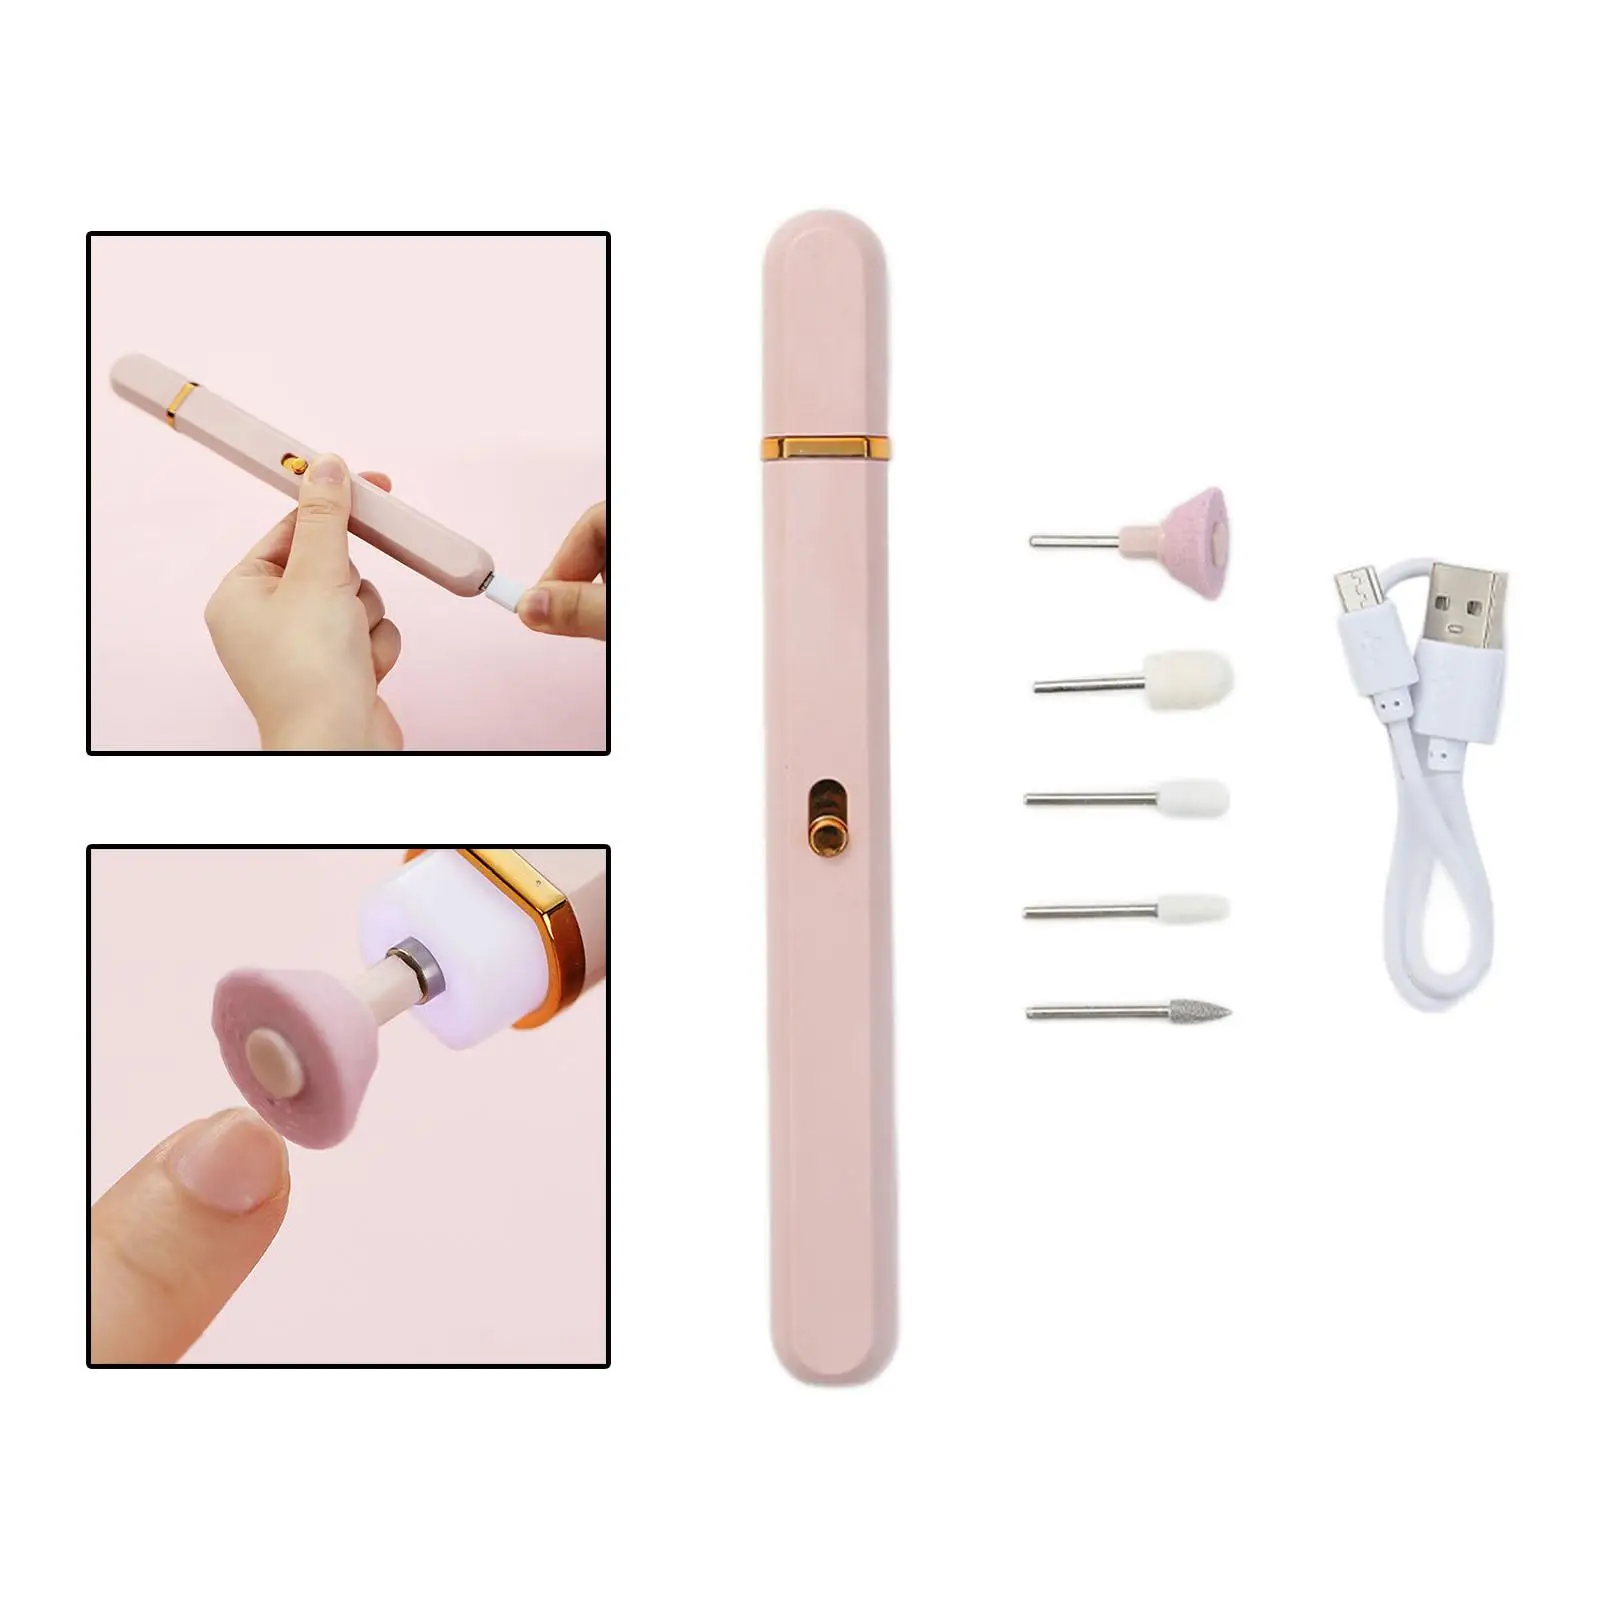 Cordless Nail Drill Set Manicure Pen with Light Nail Polishing Machine for Smooth Cleaning Care Home Salon Personal Home Use